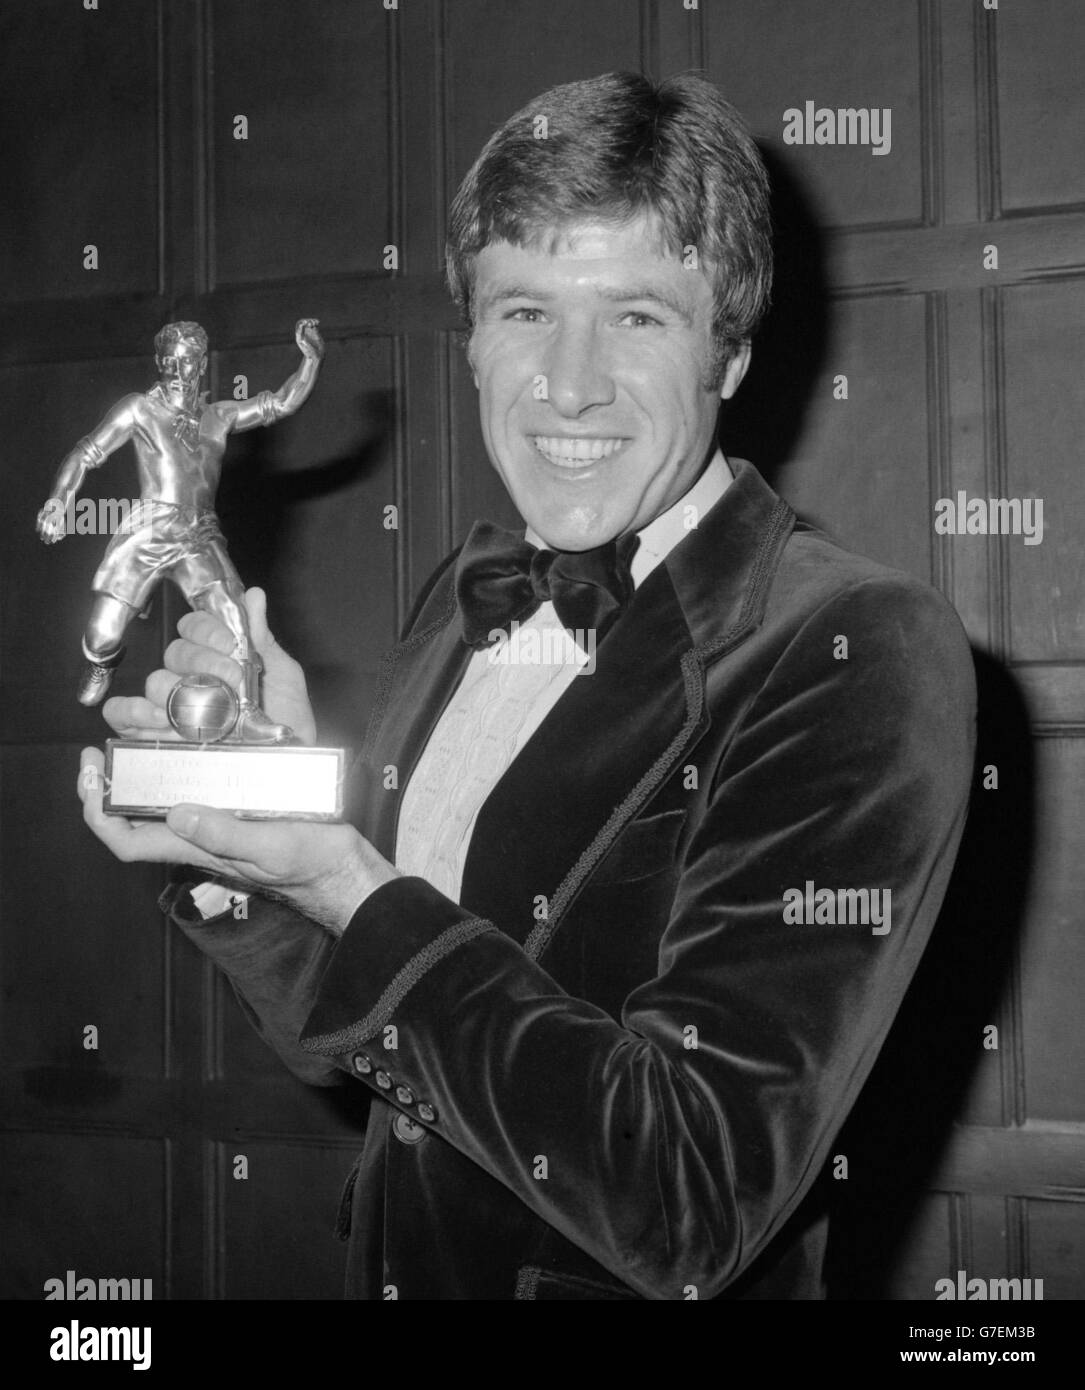 Emlyn Hughes, the Liverpool captain elected footballer of the year by the Football Writers Association, at the Cafe Royal in London, after receiving his trophy from Helmut Schoen, the manager of World Champions, West Germany. *17/11/04: Football legends and former team-mates of Emlyn Hughes will join hundreds of mourners at the funeral of the Liverpool and England star. Hughes, 57, died from a brain tumour at his home in Sheffield a week ago. Stock Photo